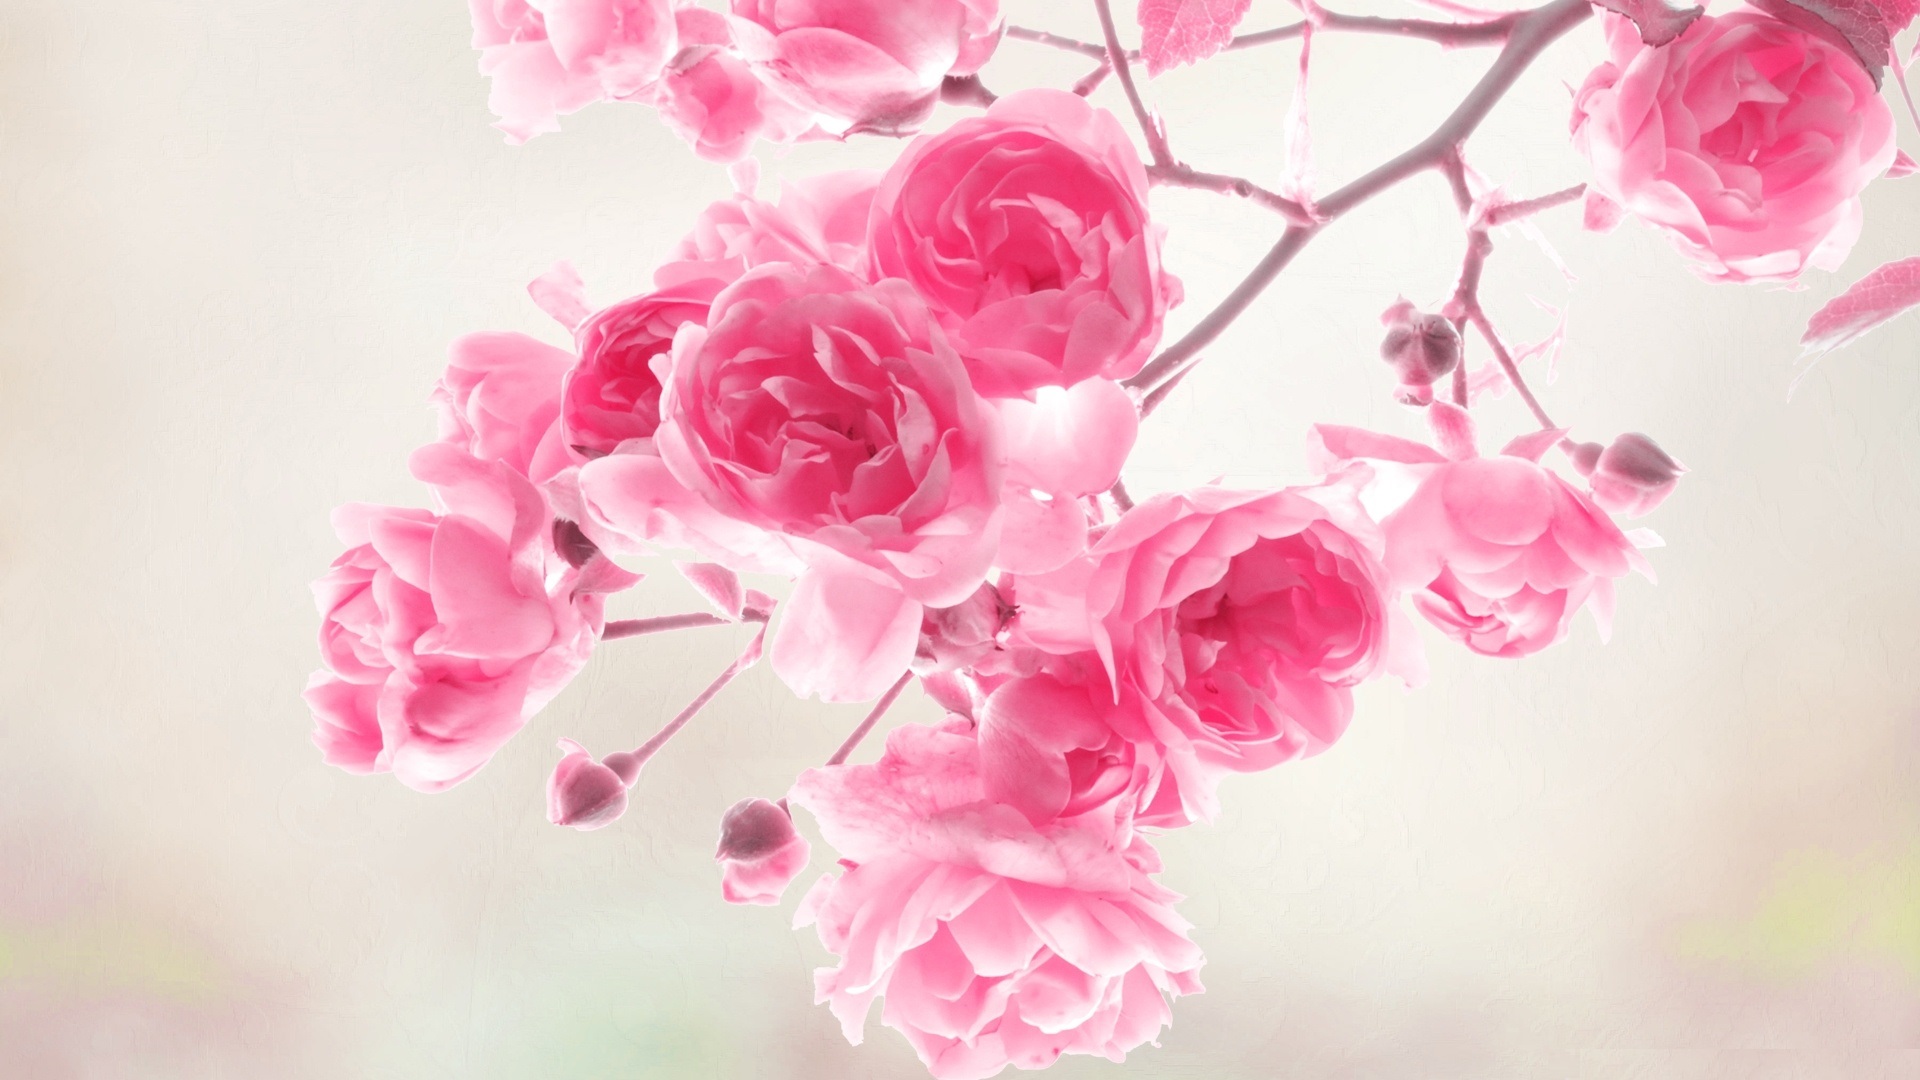 Free Download Full Hd Flowers Wallpapers 2560x1600 For Your Desktop Mobile And Tablet Explore